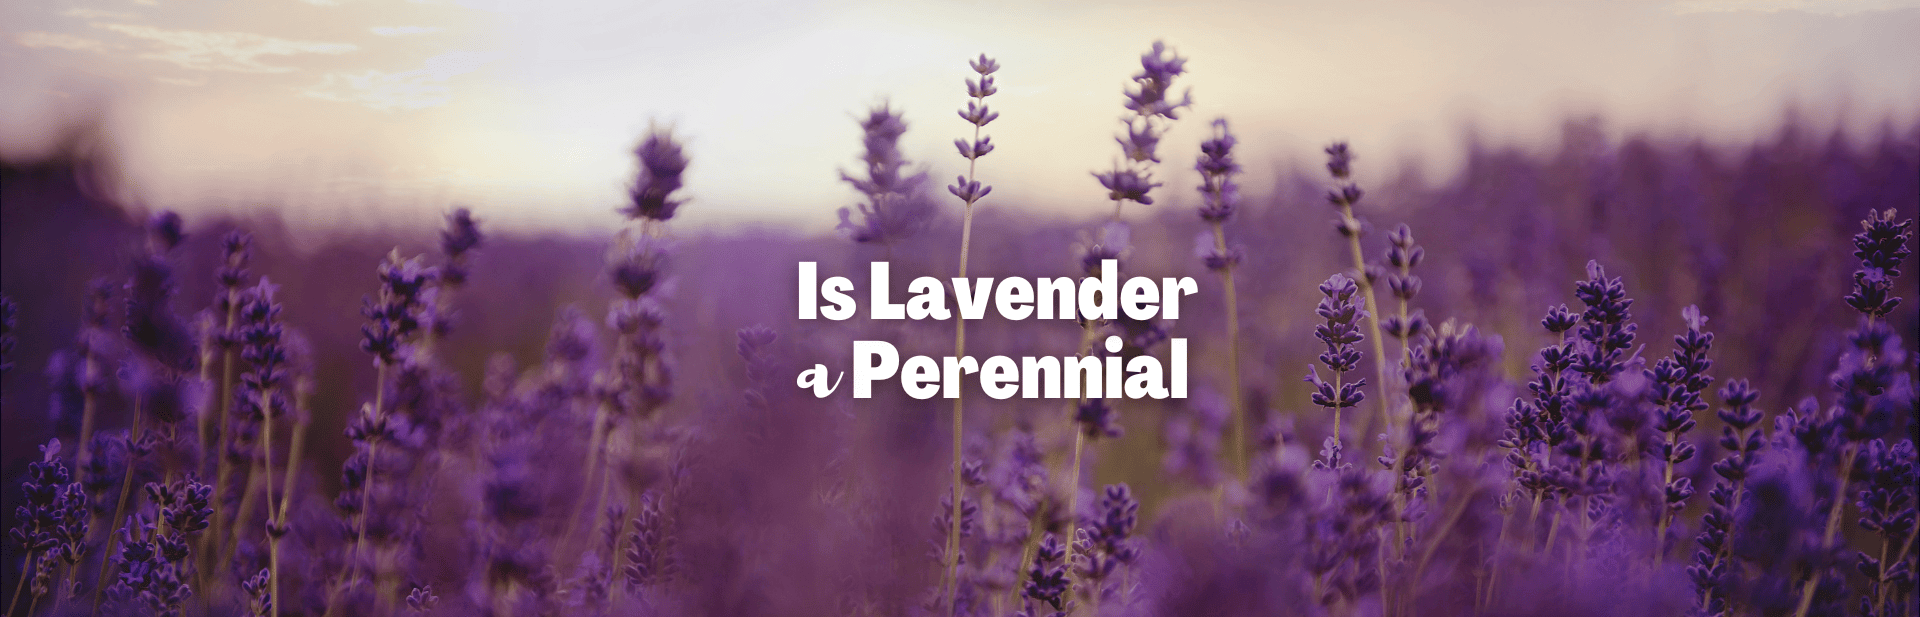 Is Lavender a Perennial? Unearthing Facts About The Fragrant Herb